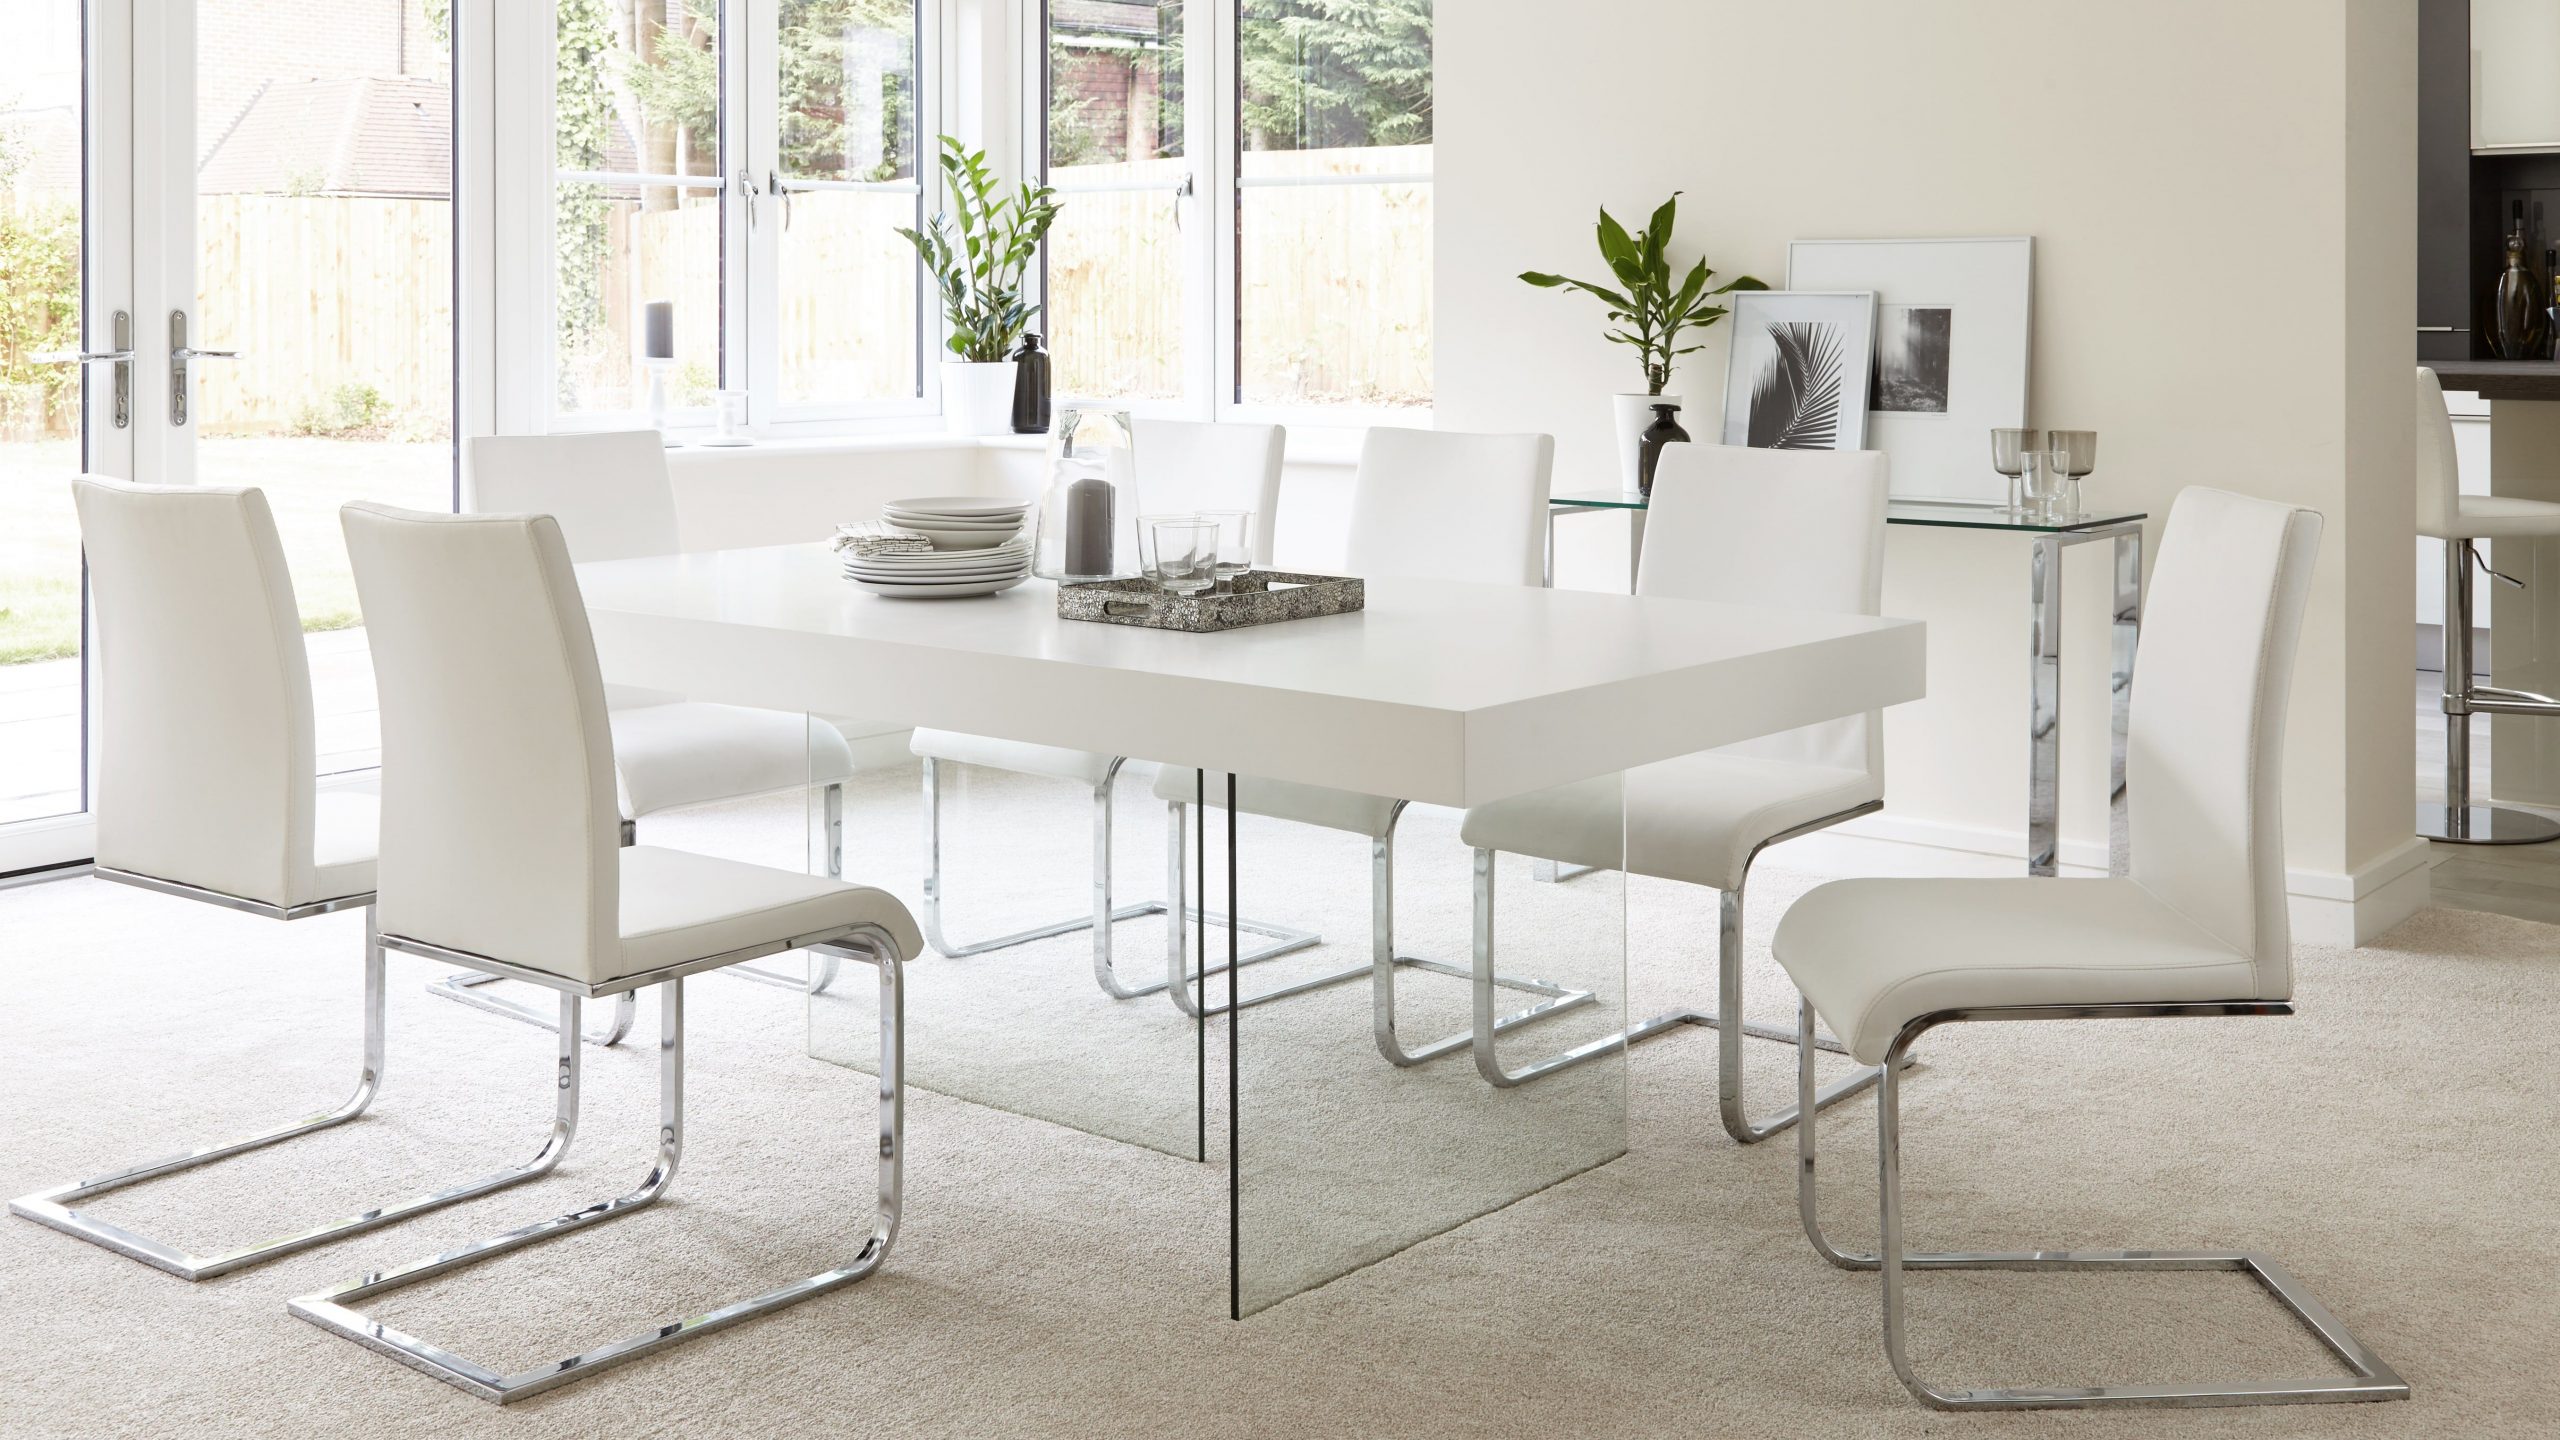 Aria White Oak And Glass Dining Table White Glass Dining with dimensions 5421 X 3050